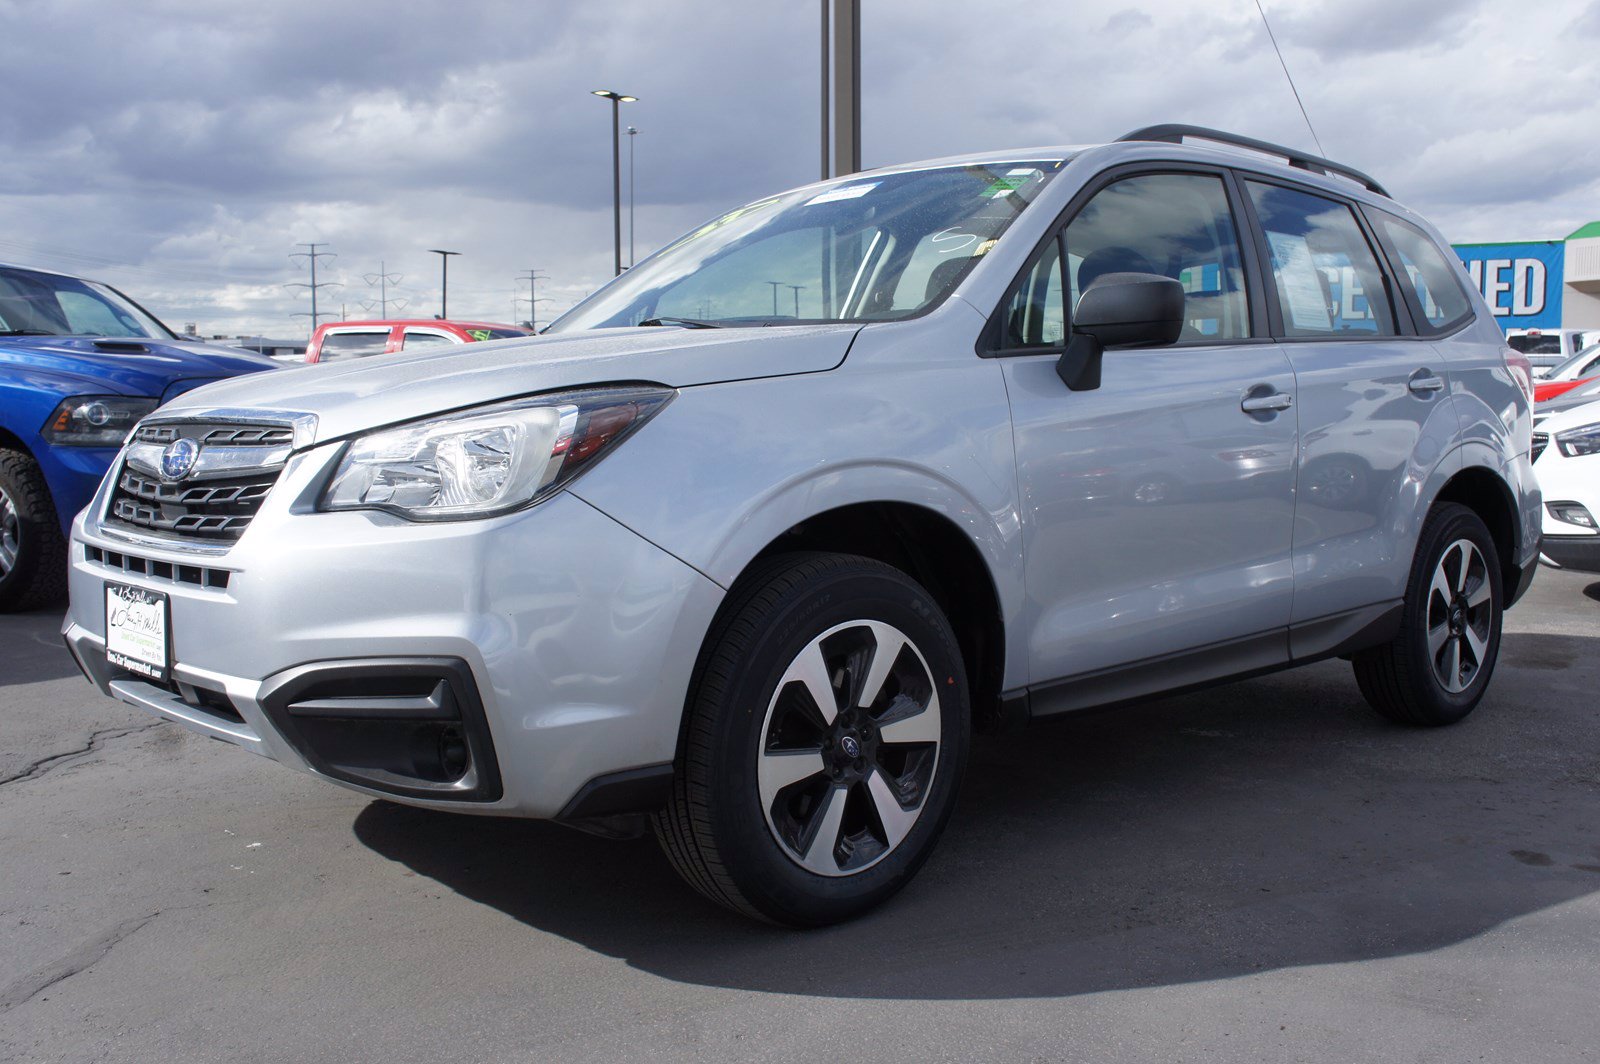 PreOwned 2017 Subaru Forester 2.5i Sport Utility in